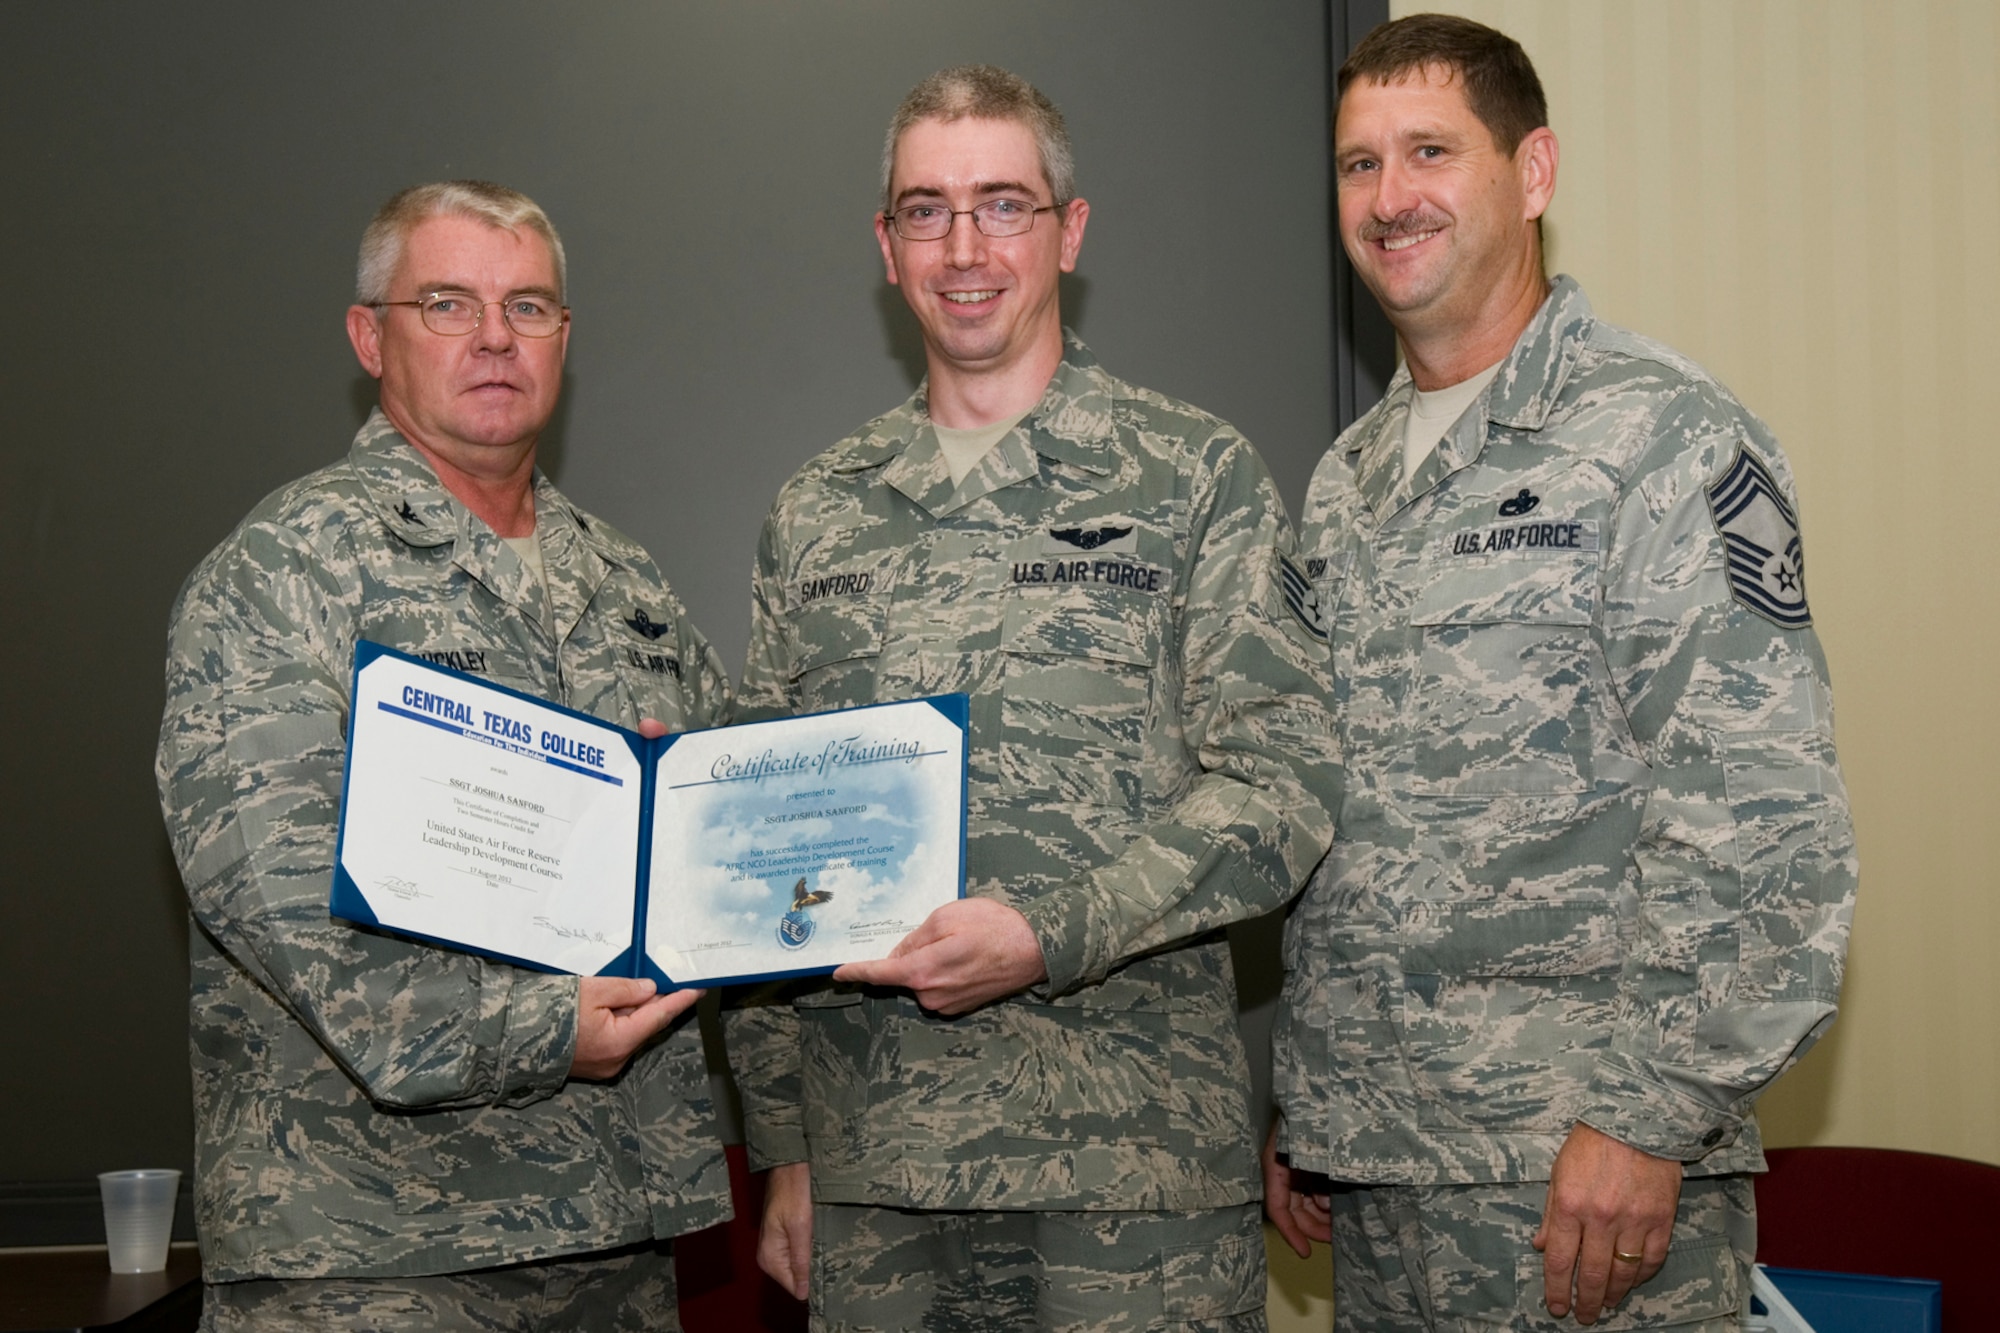 GRISSOM AIR RESERVE BASE, Ind. -- Staff Sgt. Joshua Sanford, 72nd Air Refueling Squadron in-flight refueling technician, receives a certificate of training from Col. Don Buckley, 434th Air Refueling Wing commander, and Chief Master Sergeant James Burba, 434th Maintenance Operations Flight maintenance superintendent, at a graduation ceremony for a Non-Commissioned Officer Leadership Development Course here Aug. 17. Sanford graduated the course with 20 other NCOs. (U.S. Air Force photo/Senior Airman Andrew McLaughlin)